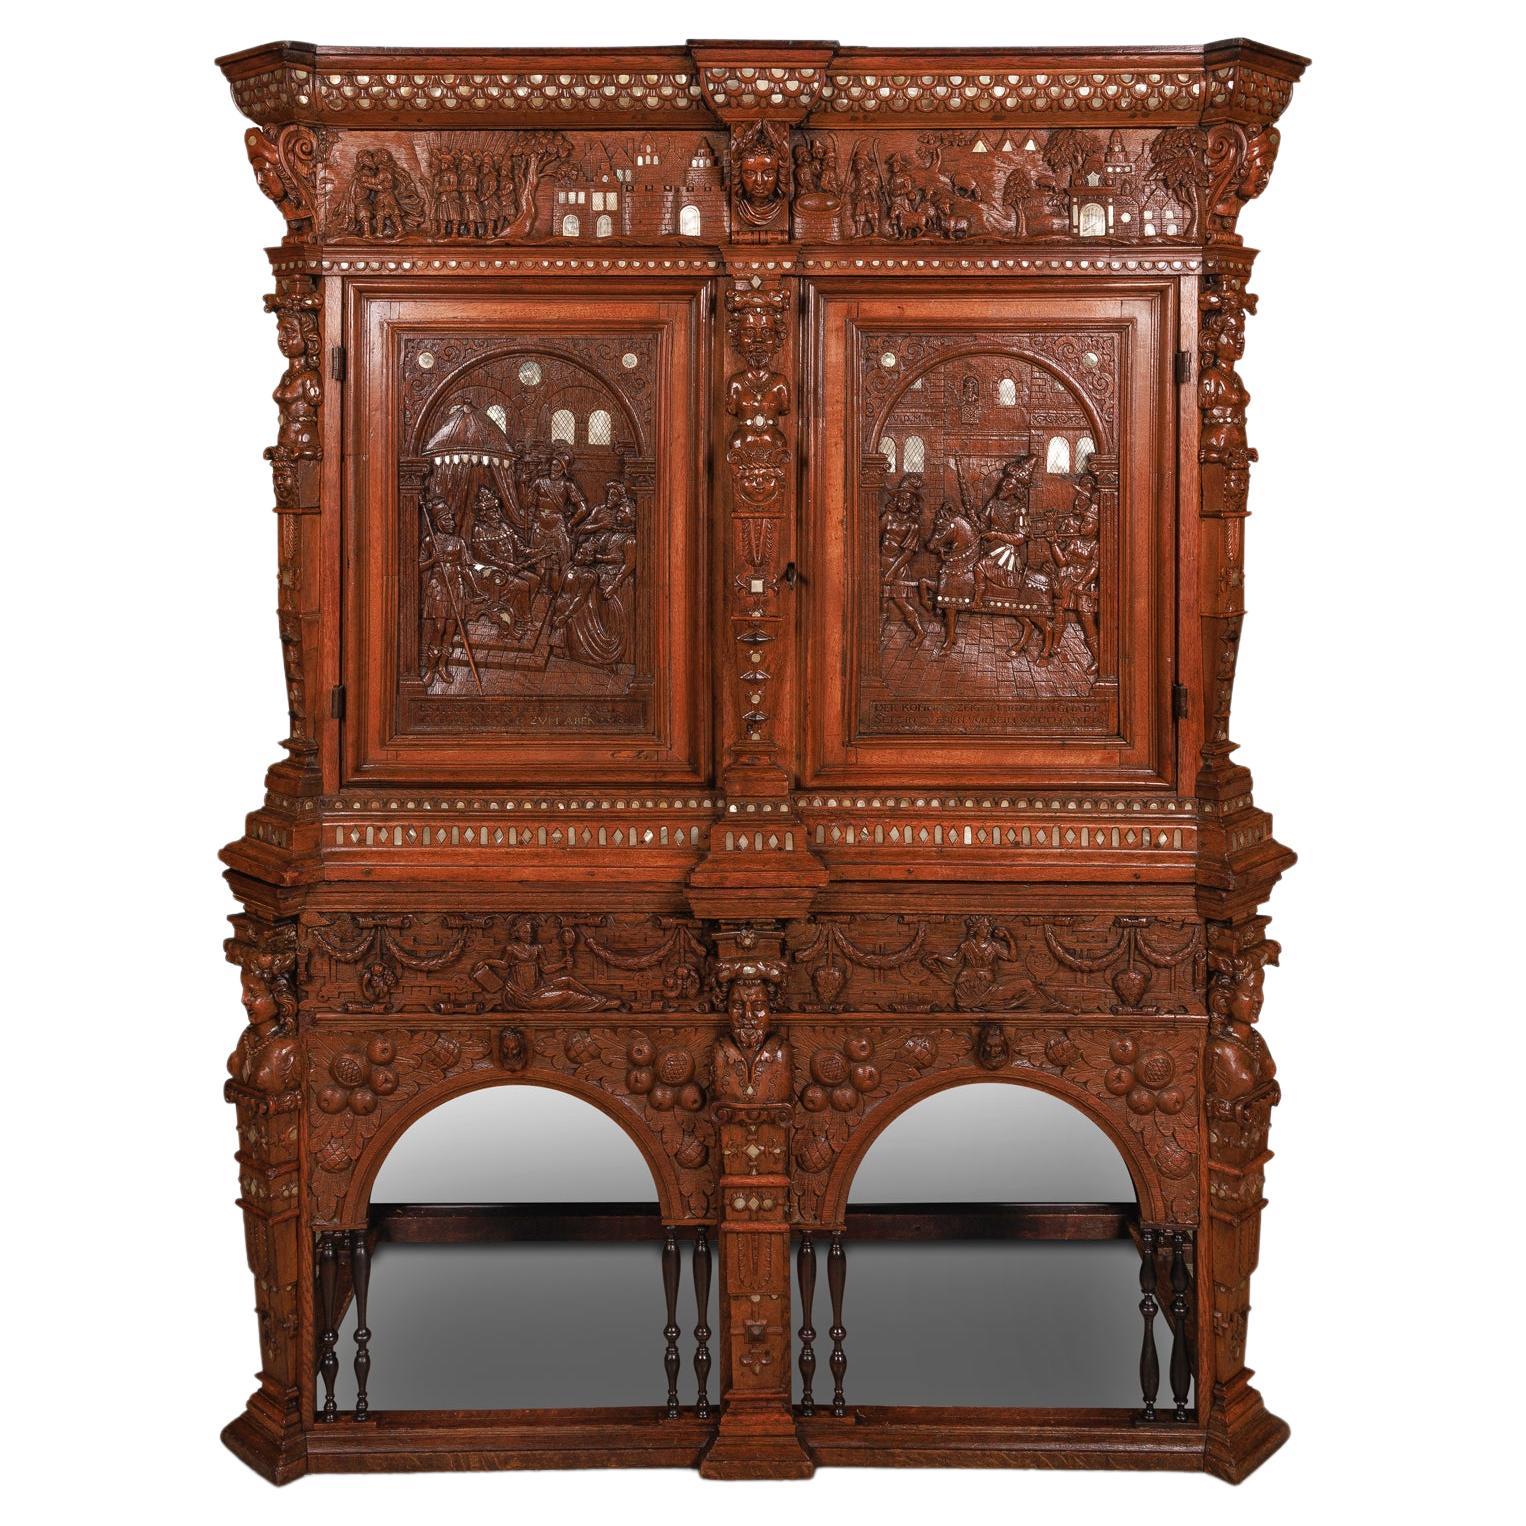 Rare and Important Renaissance "Judaica" Carved Oak Wood Cabinet